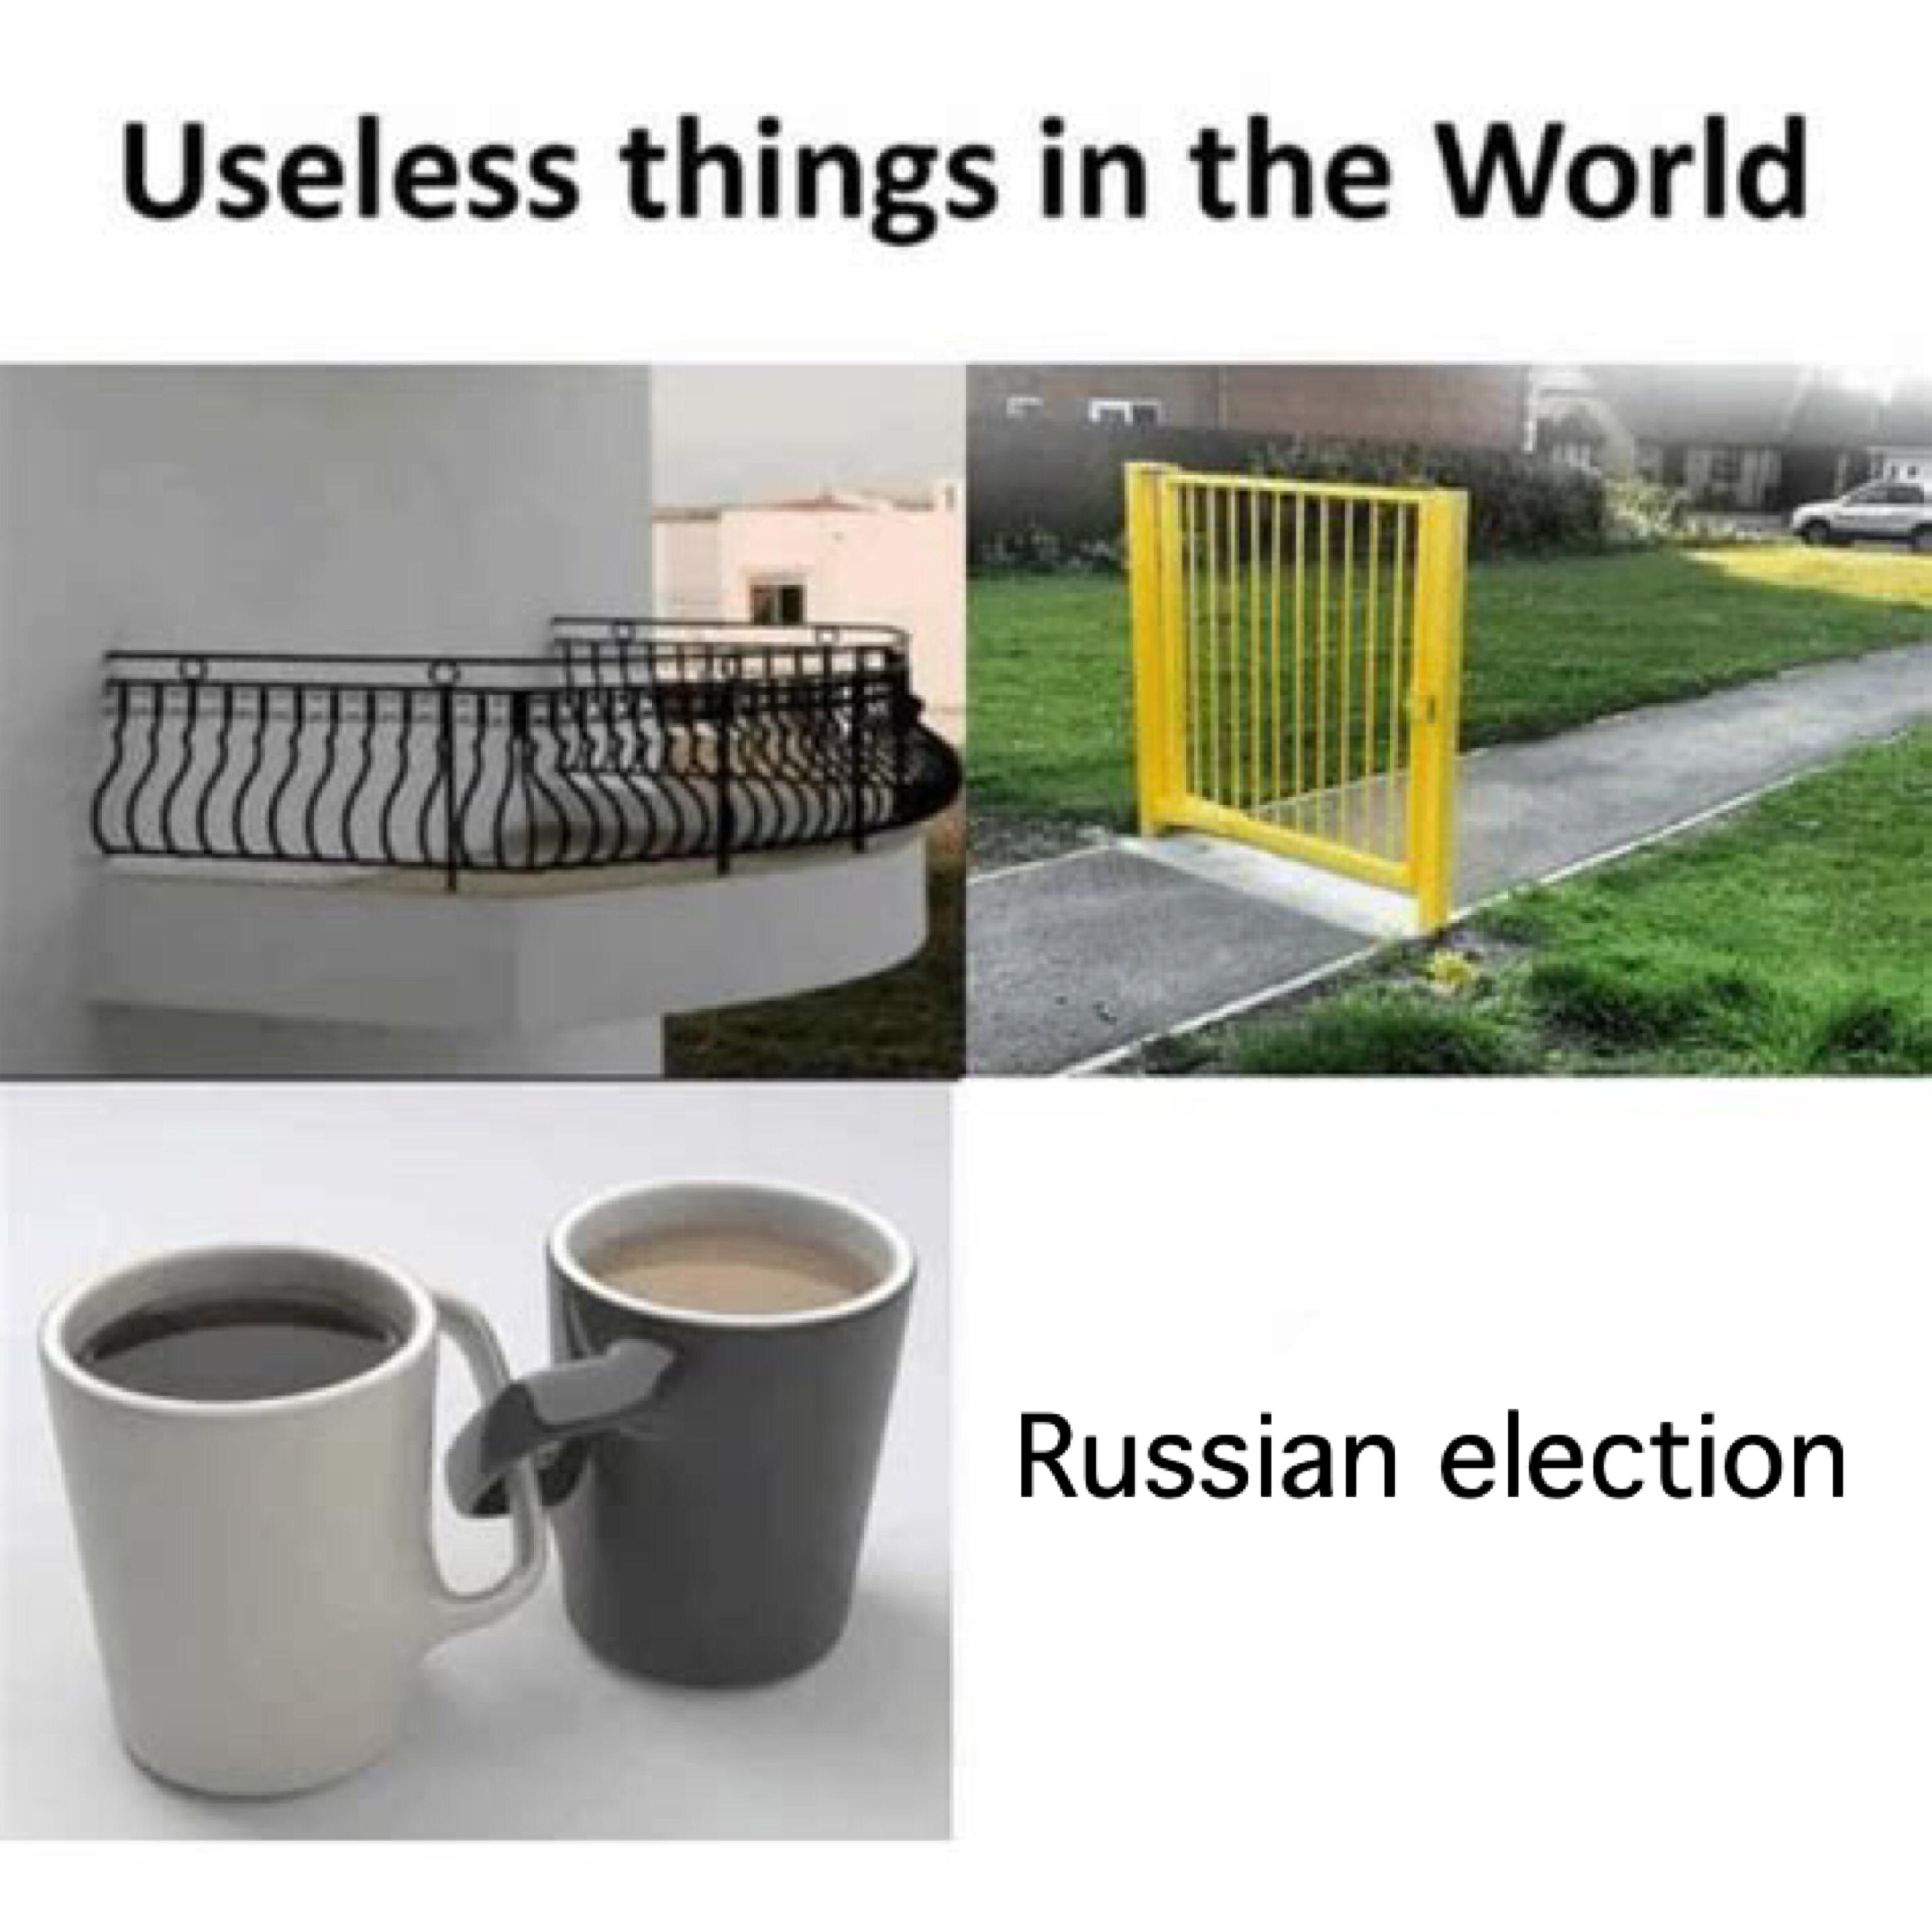 useless things in the world meme - Useless things in the World Russian election